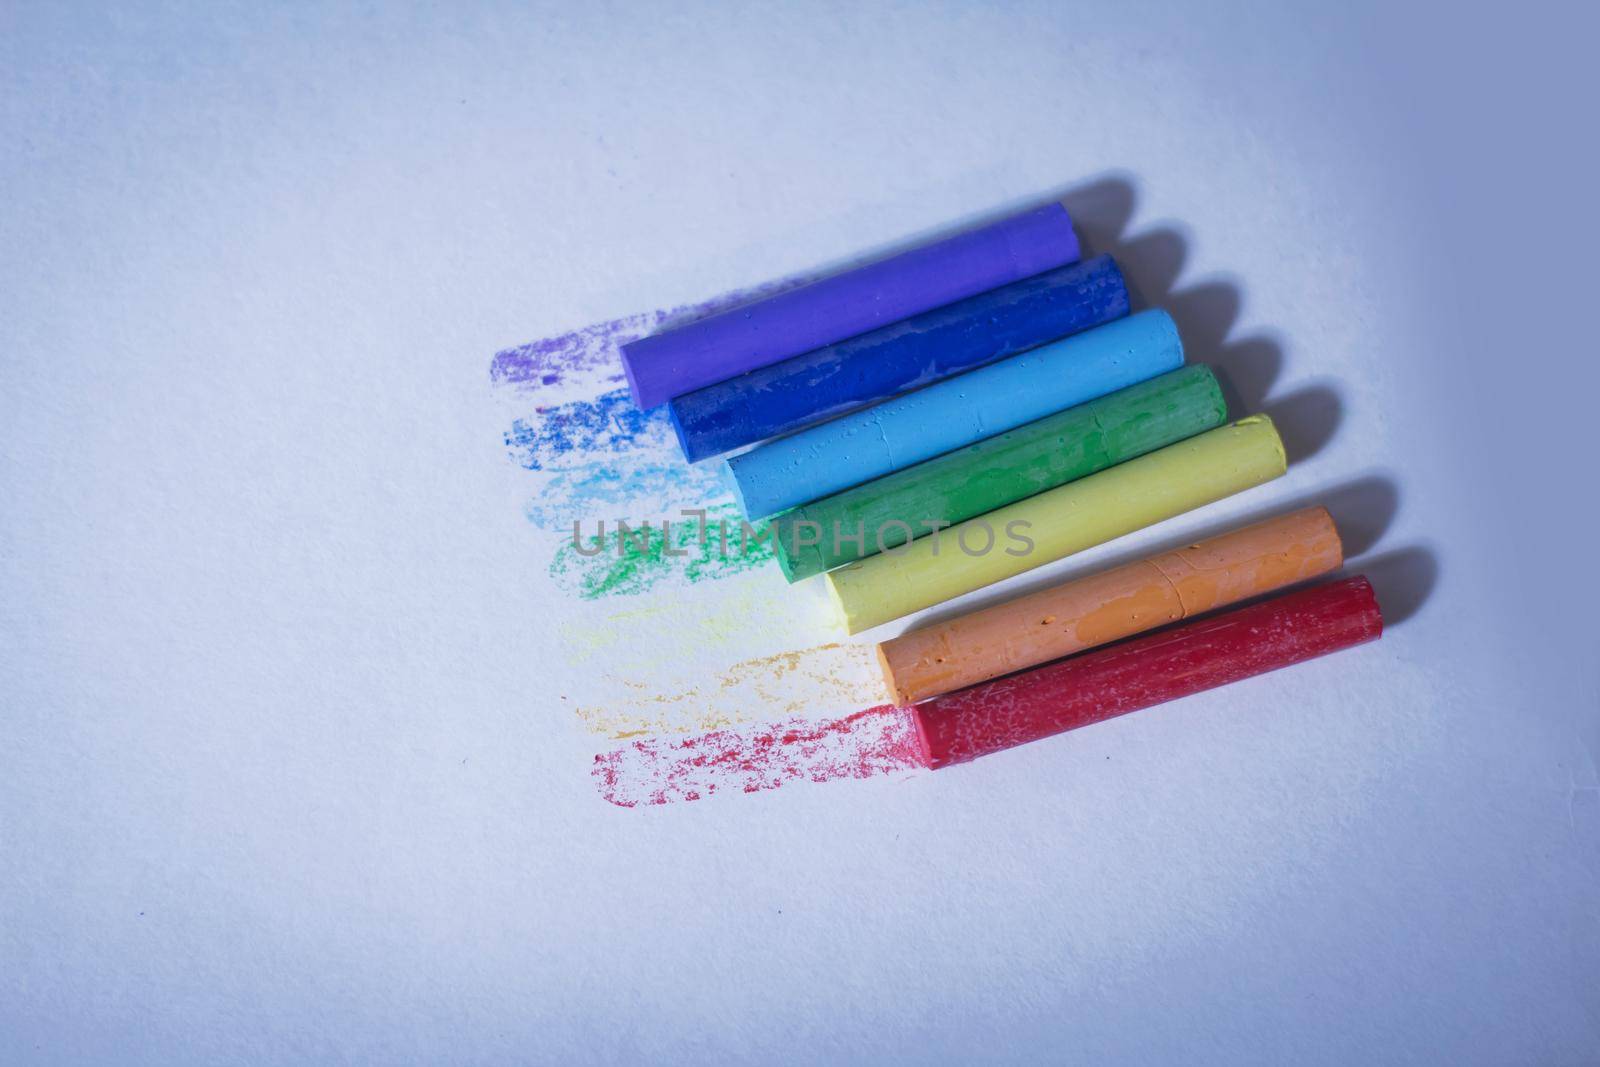 multicolored crayons for drawing.isolated on a white background.photo with copy space